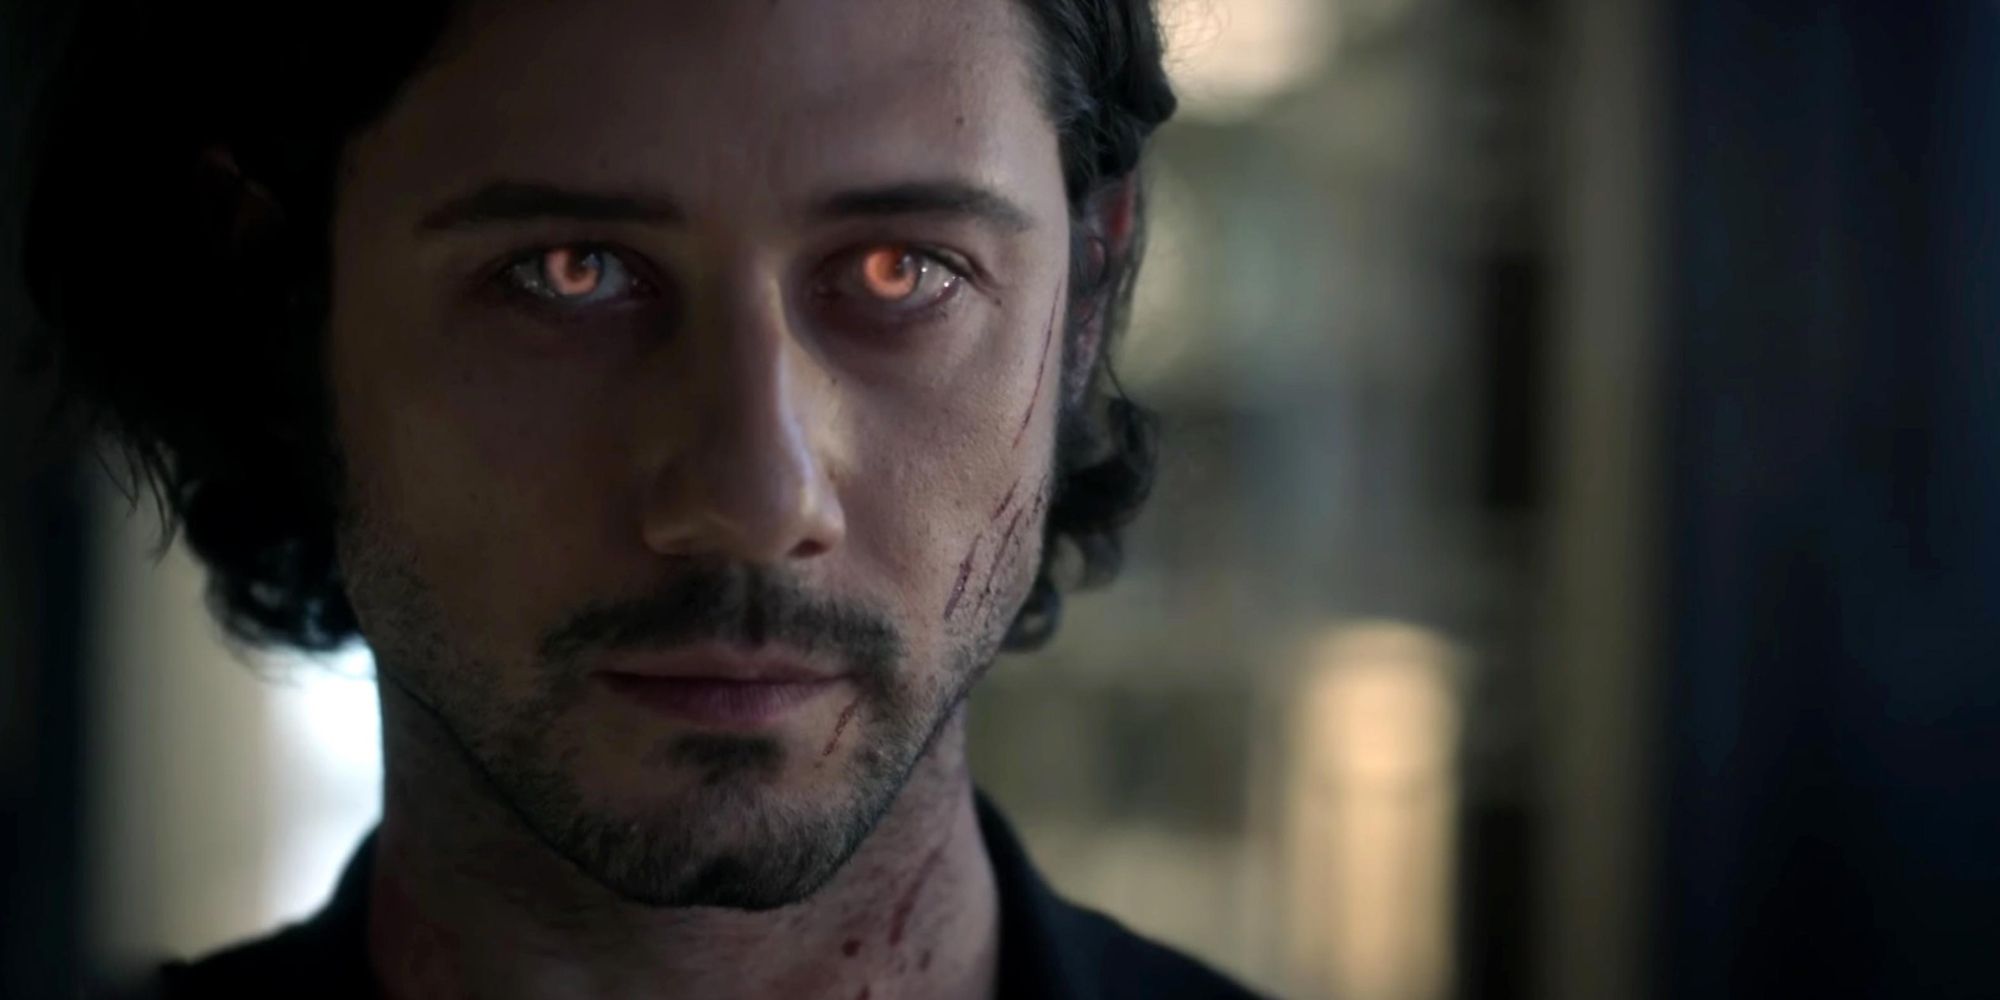 Hale Appleman as Eliot in The Magicians